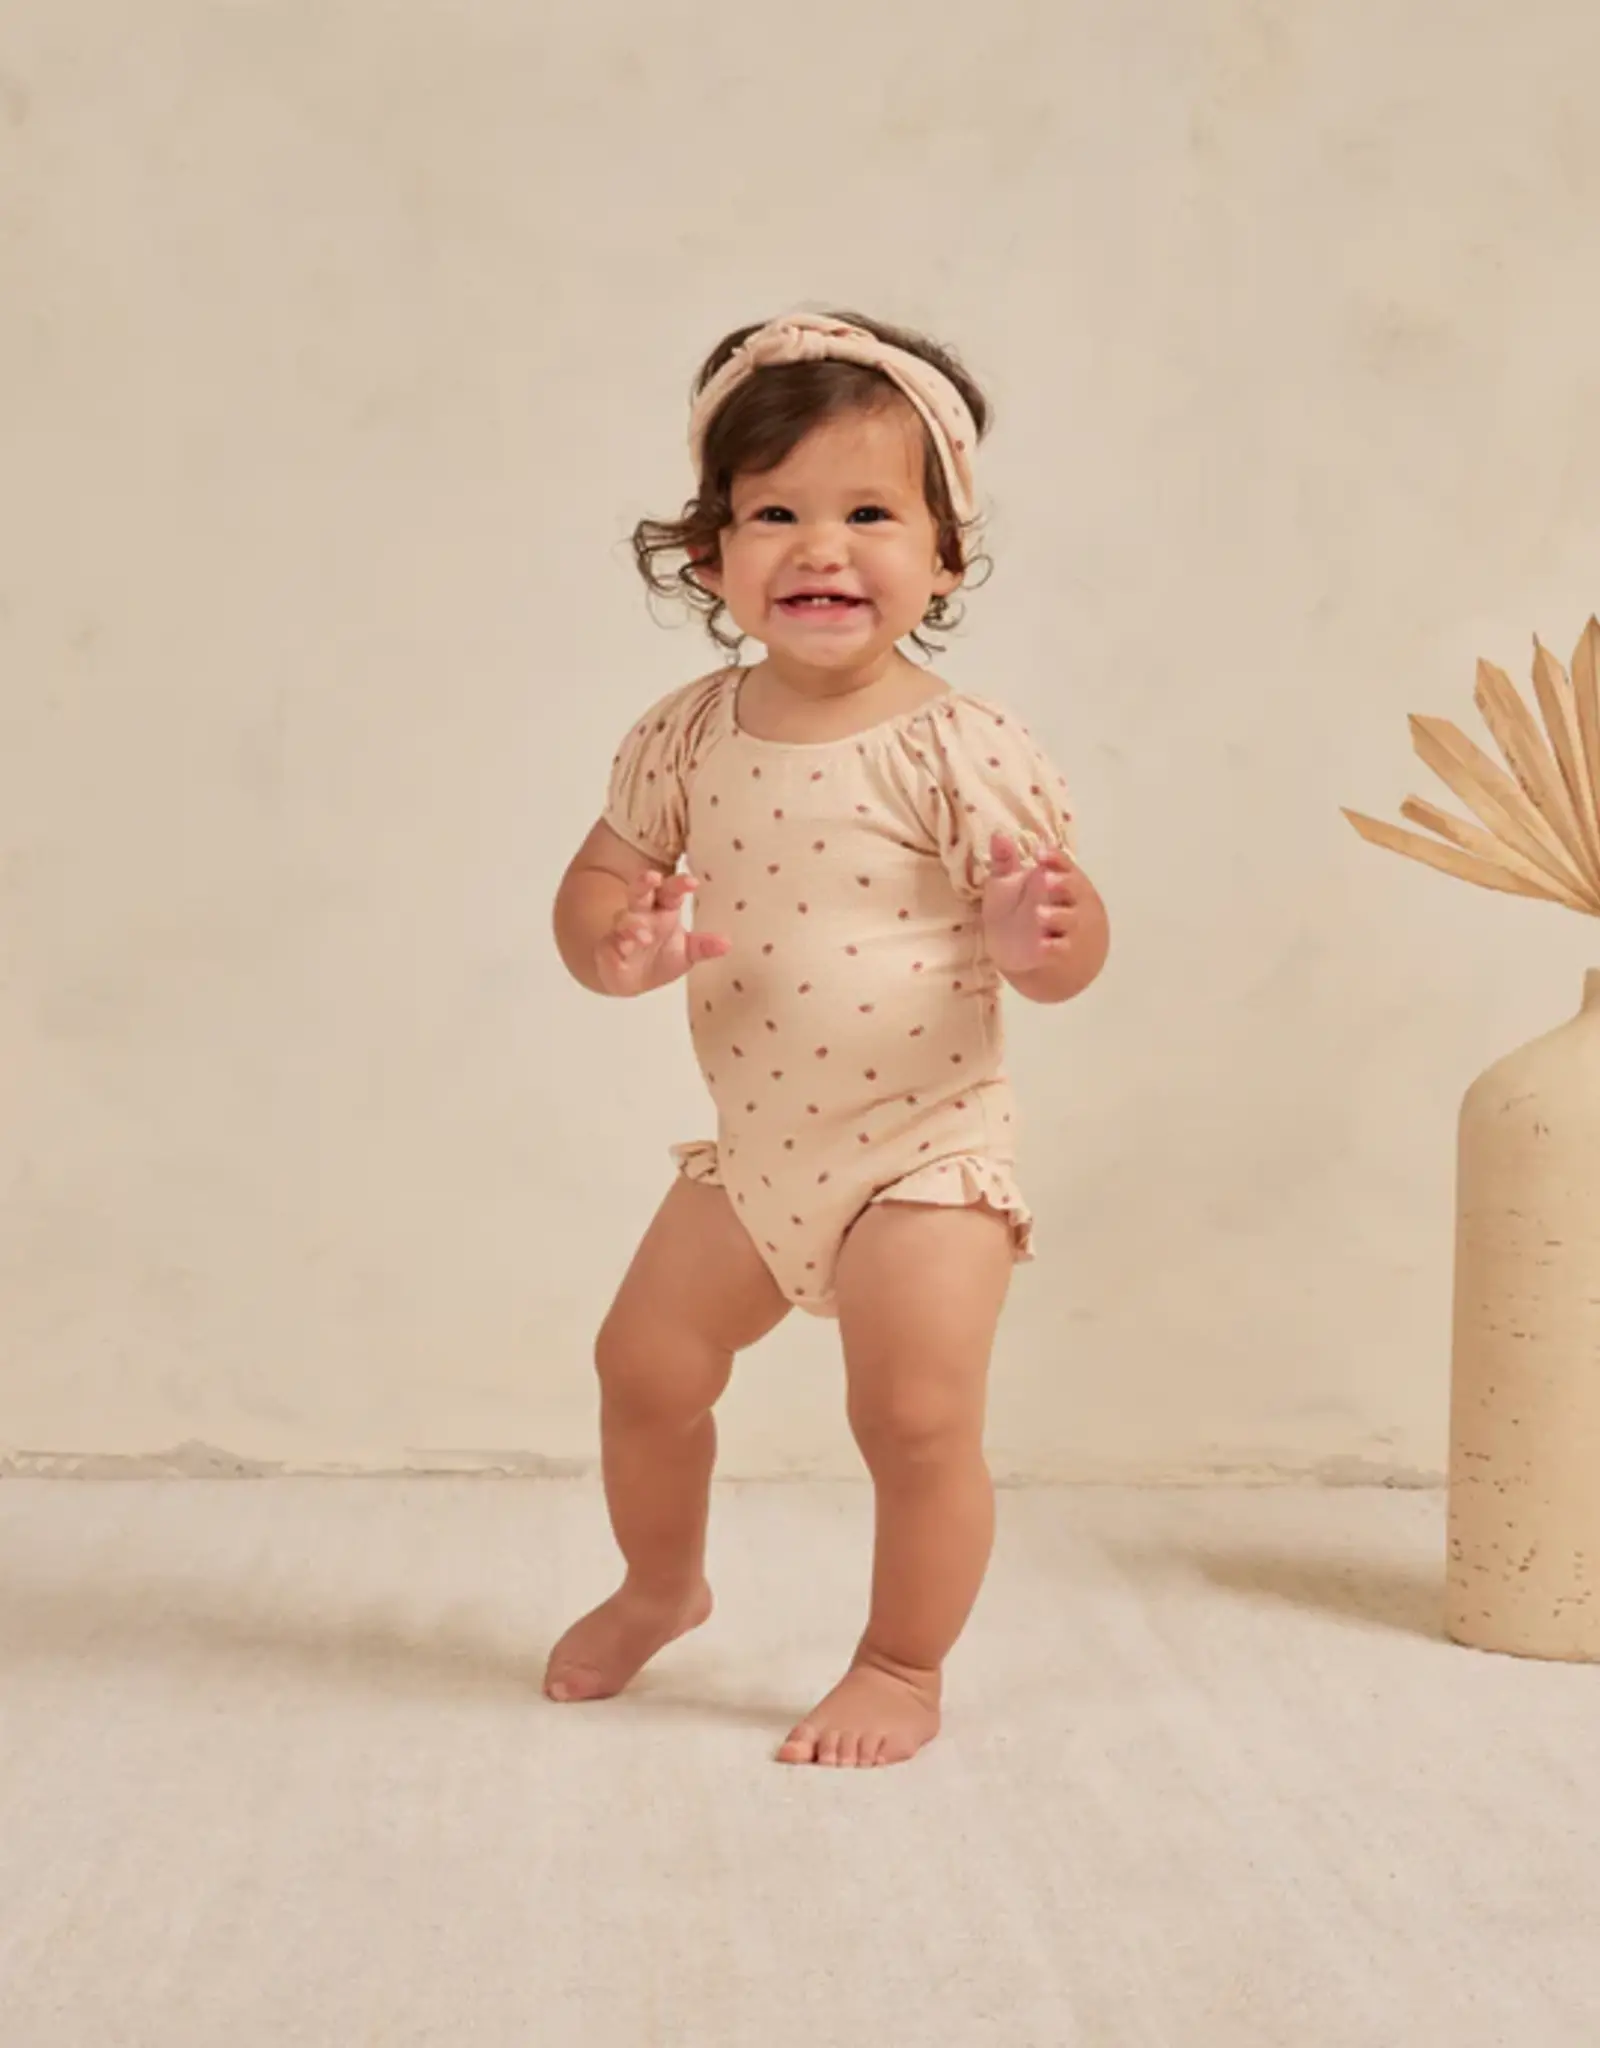 QuincyMae 12-18MO: Catalina One-Piece Swimsuit - Strawberries